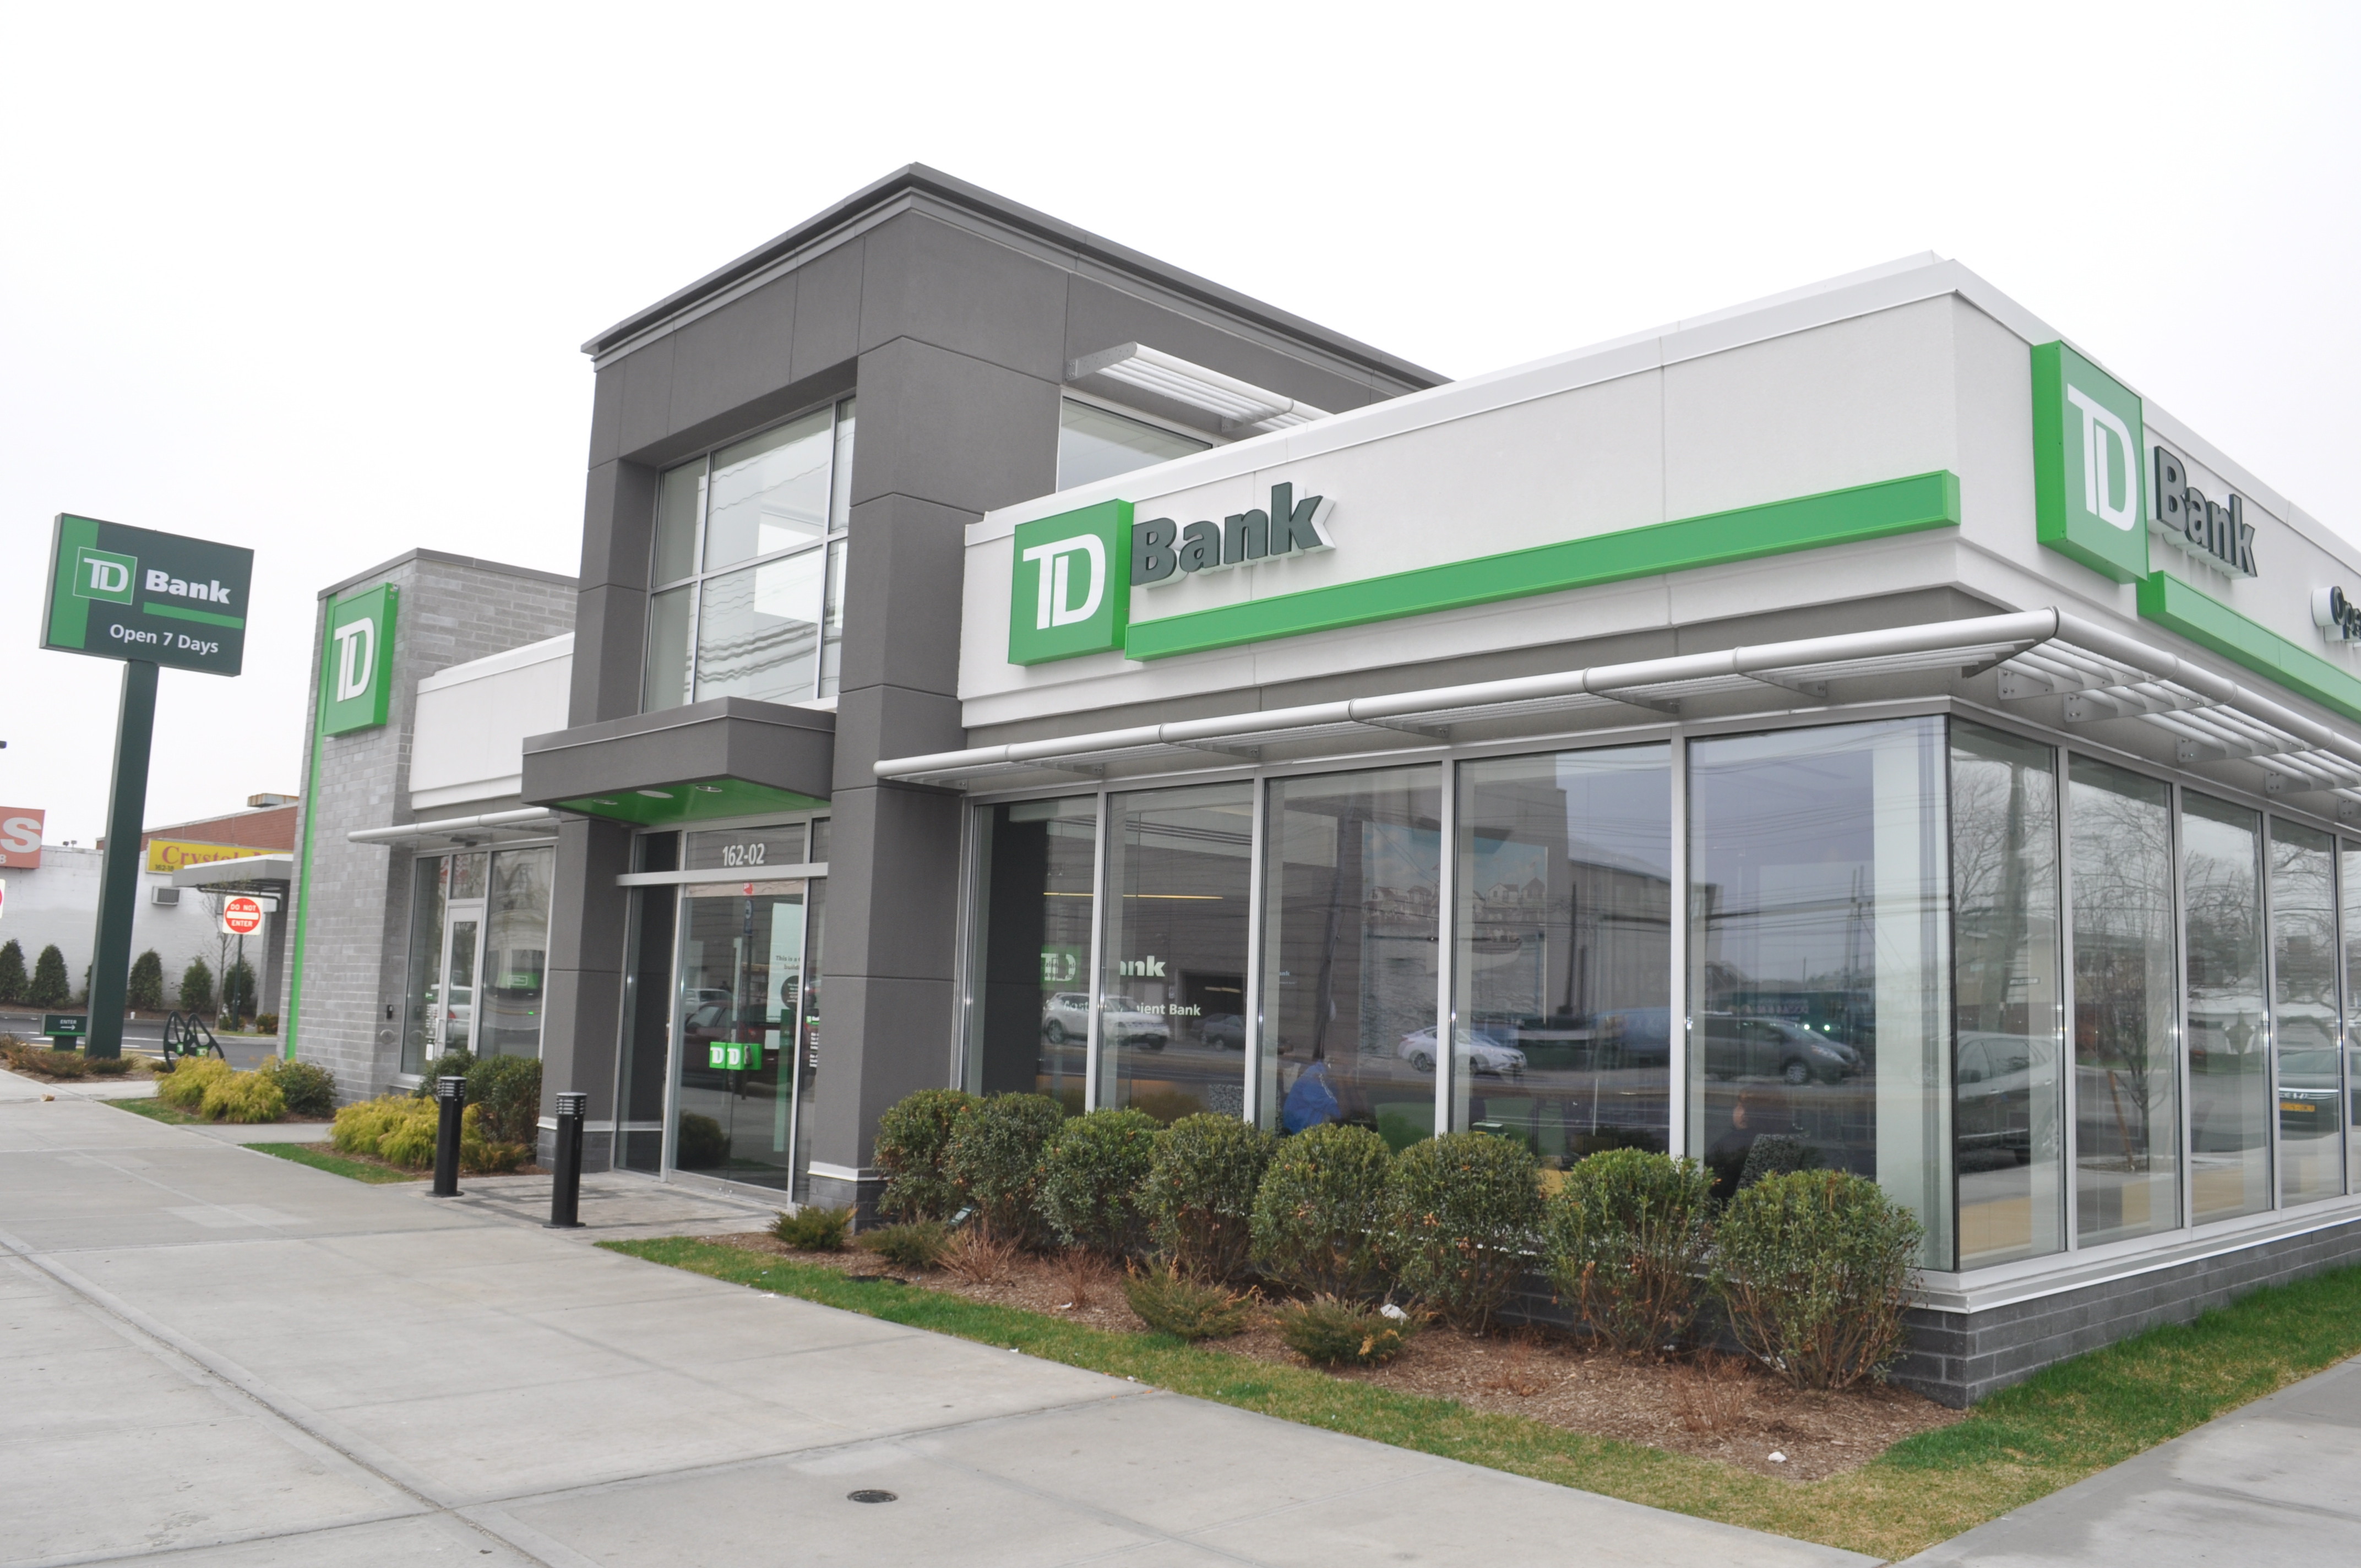 TD Bank Hit on Cross Bay in Howard Beach | The Forum Newsgroup